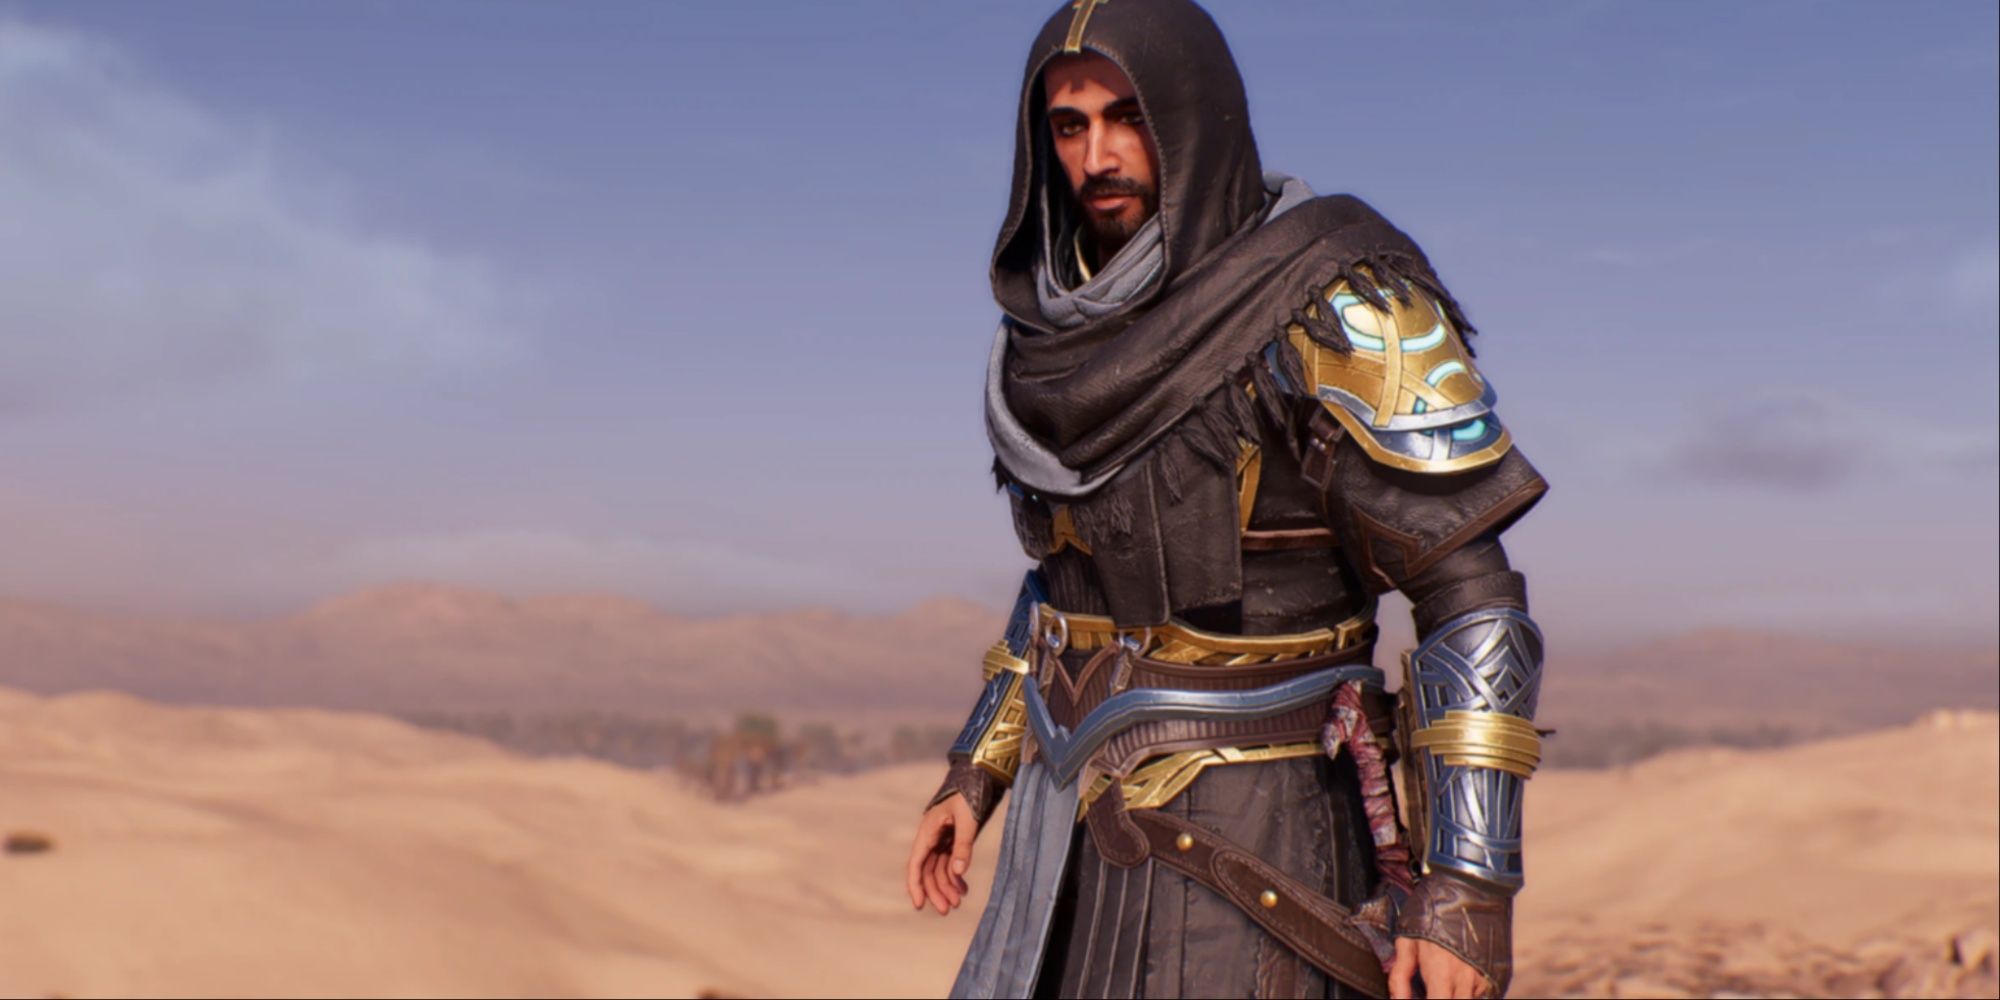 Basim in the middle of the desert with Milad's Outfit on but no mask, thanks to the mod by IBSARP.